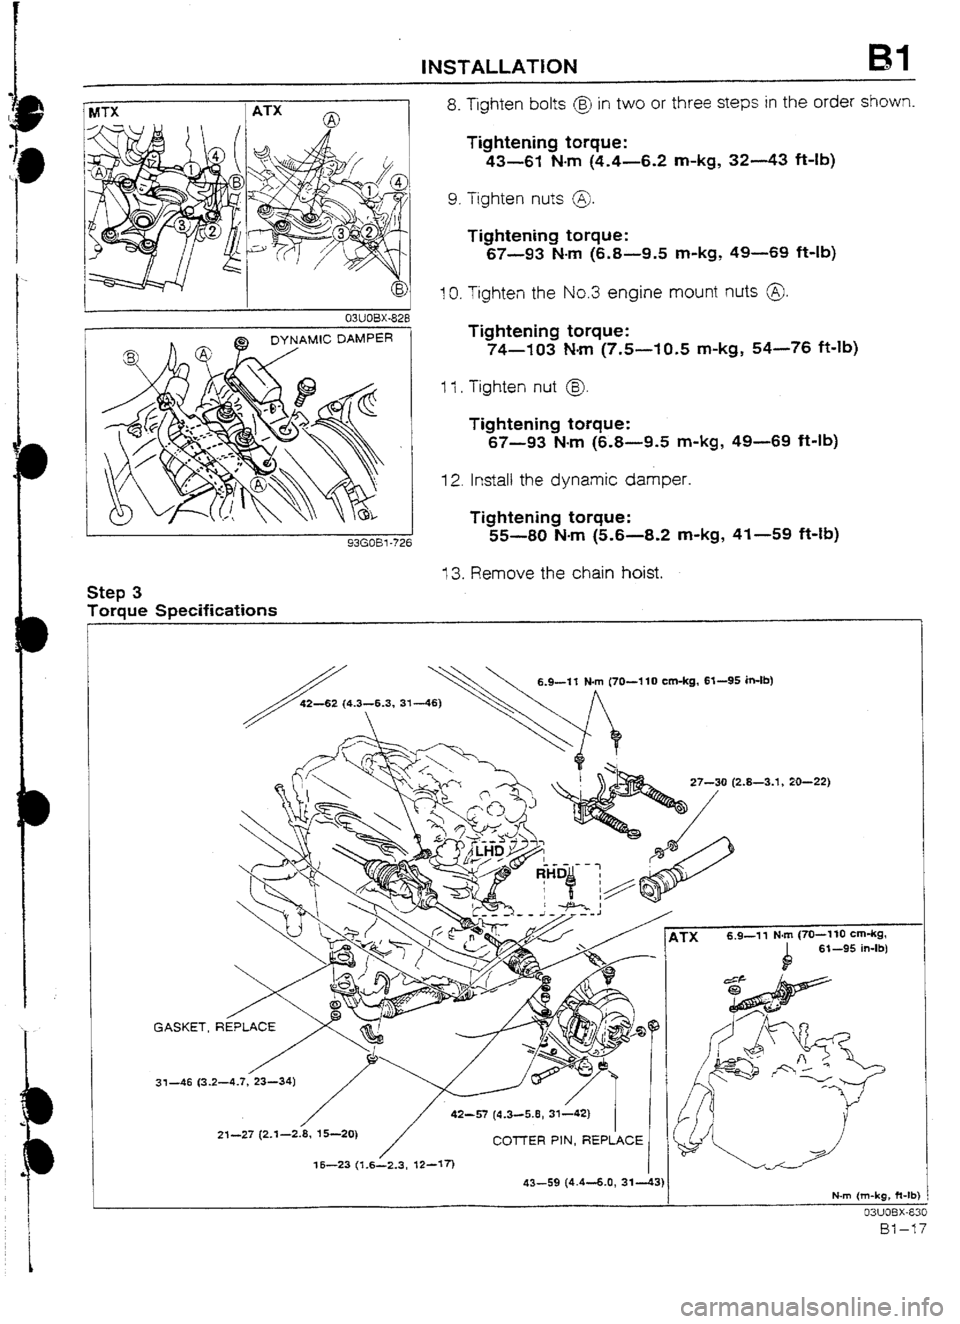 MAZDA 232 1990   Suplement Service Manual INSTALLATlON 
MTX 1 A-I-X 
WUOBX-828 
43GOBl-72t 
Step 3 
Torque Specifications 8. Tighten bolts @ in two or three steps in the order shown. 
Tightening torque: 
43-61 N-m (4.4-6.2 m-kg, 32-43 ft-lb) 